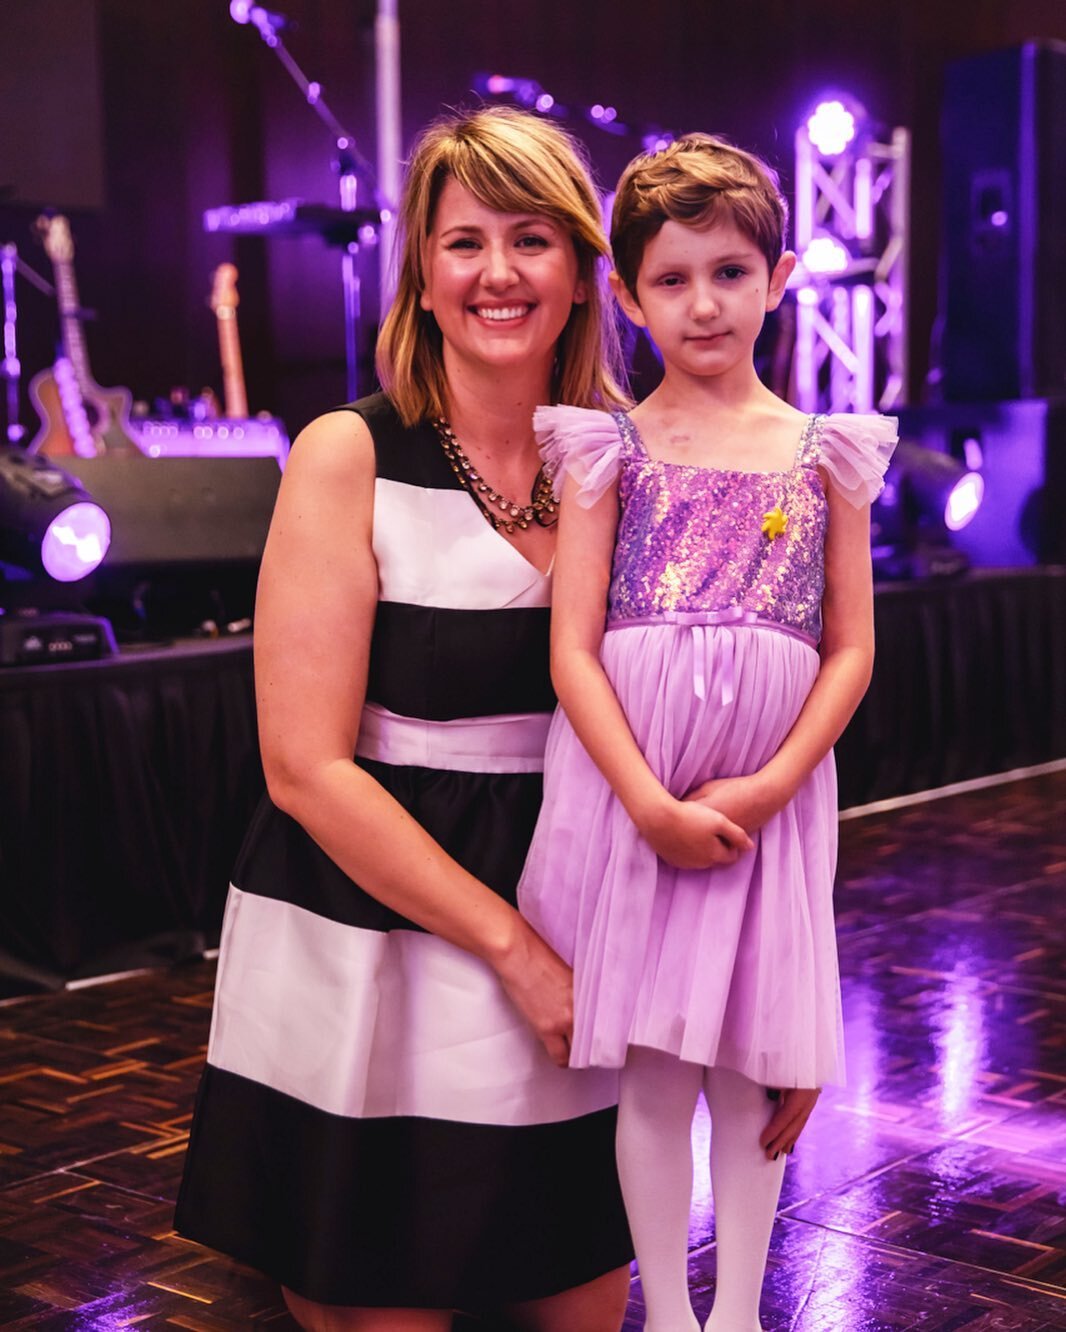 When a child is diagnosed
with cancer, the entire family
is affected. Within this
process, all will face
emotional stressors - which
we cannot fathom.
We are so proud of the work
we do at The Arts of Healing
providing a moment of respite
for the phys